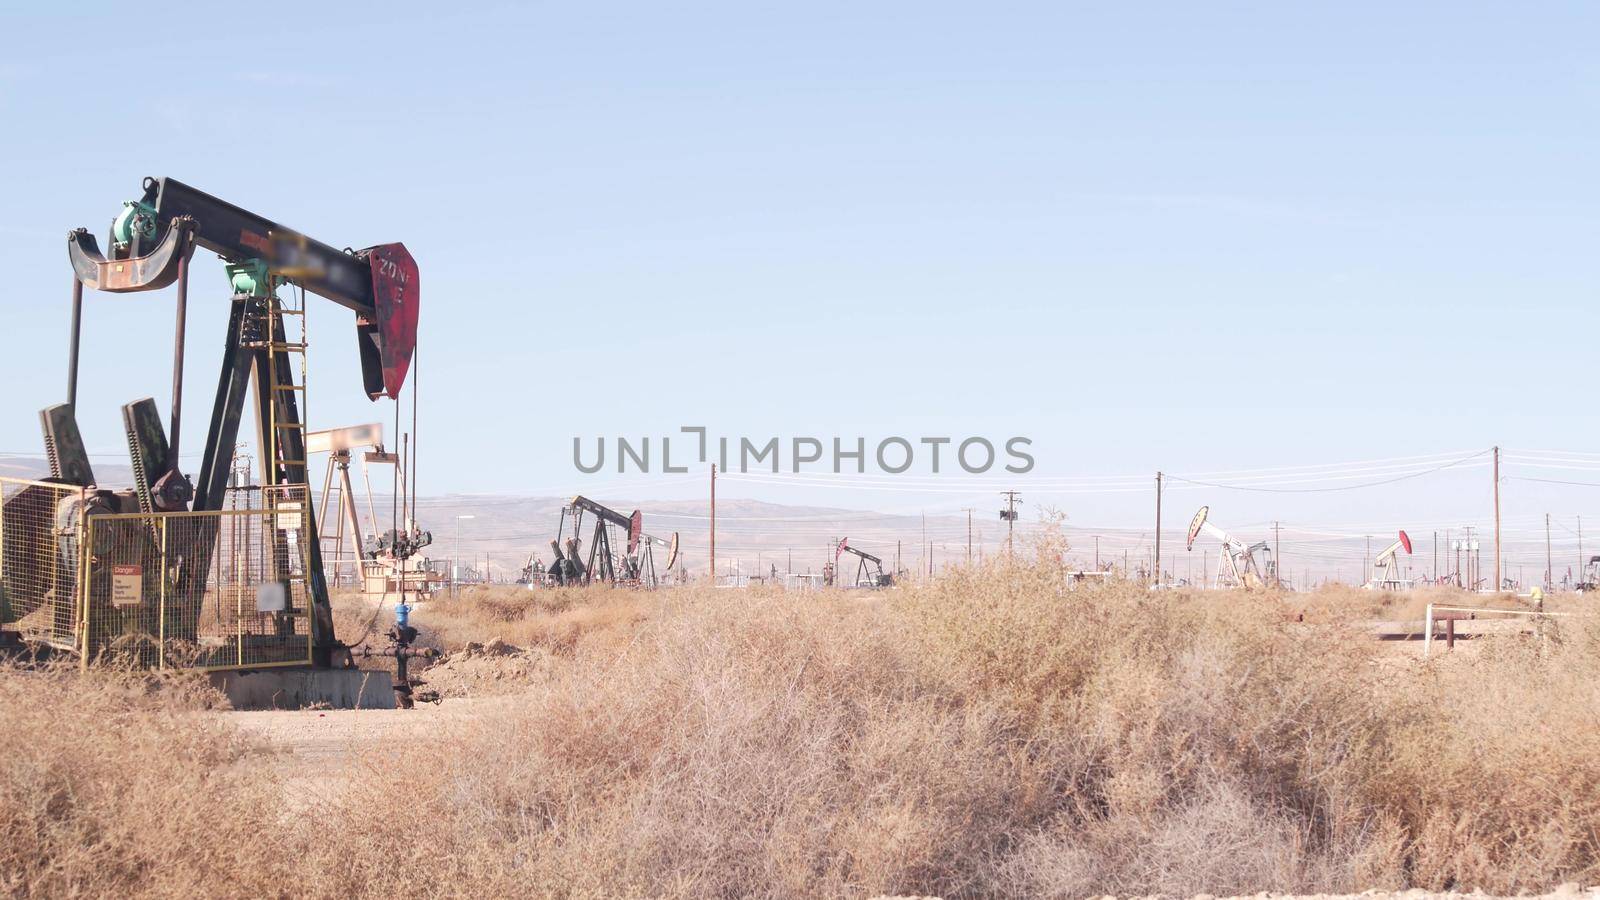 Pump jacks on oil field, USA. Rigs for crude fossil extraction on oilfield wells by DogoraSun